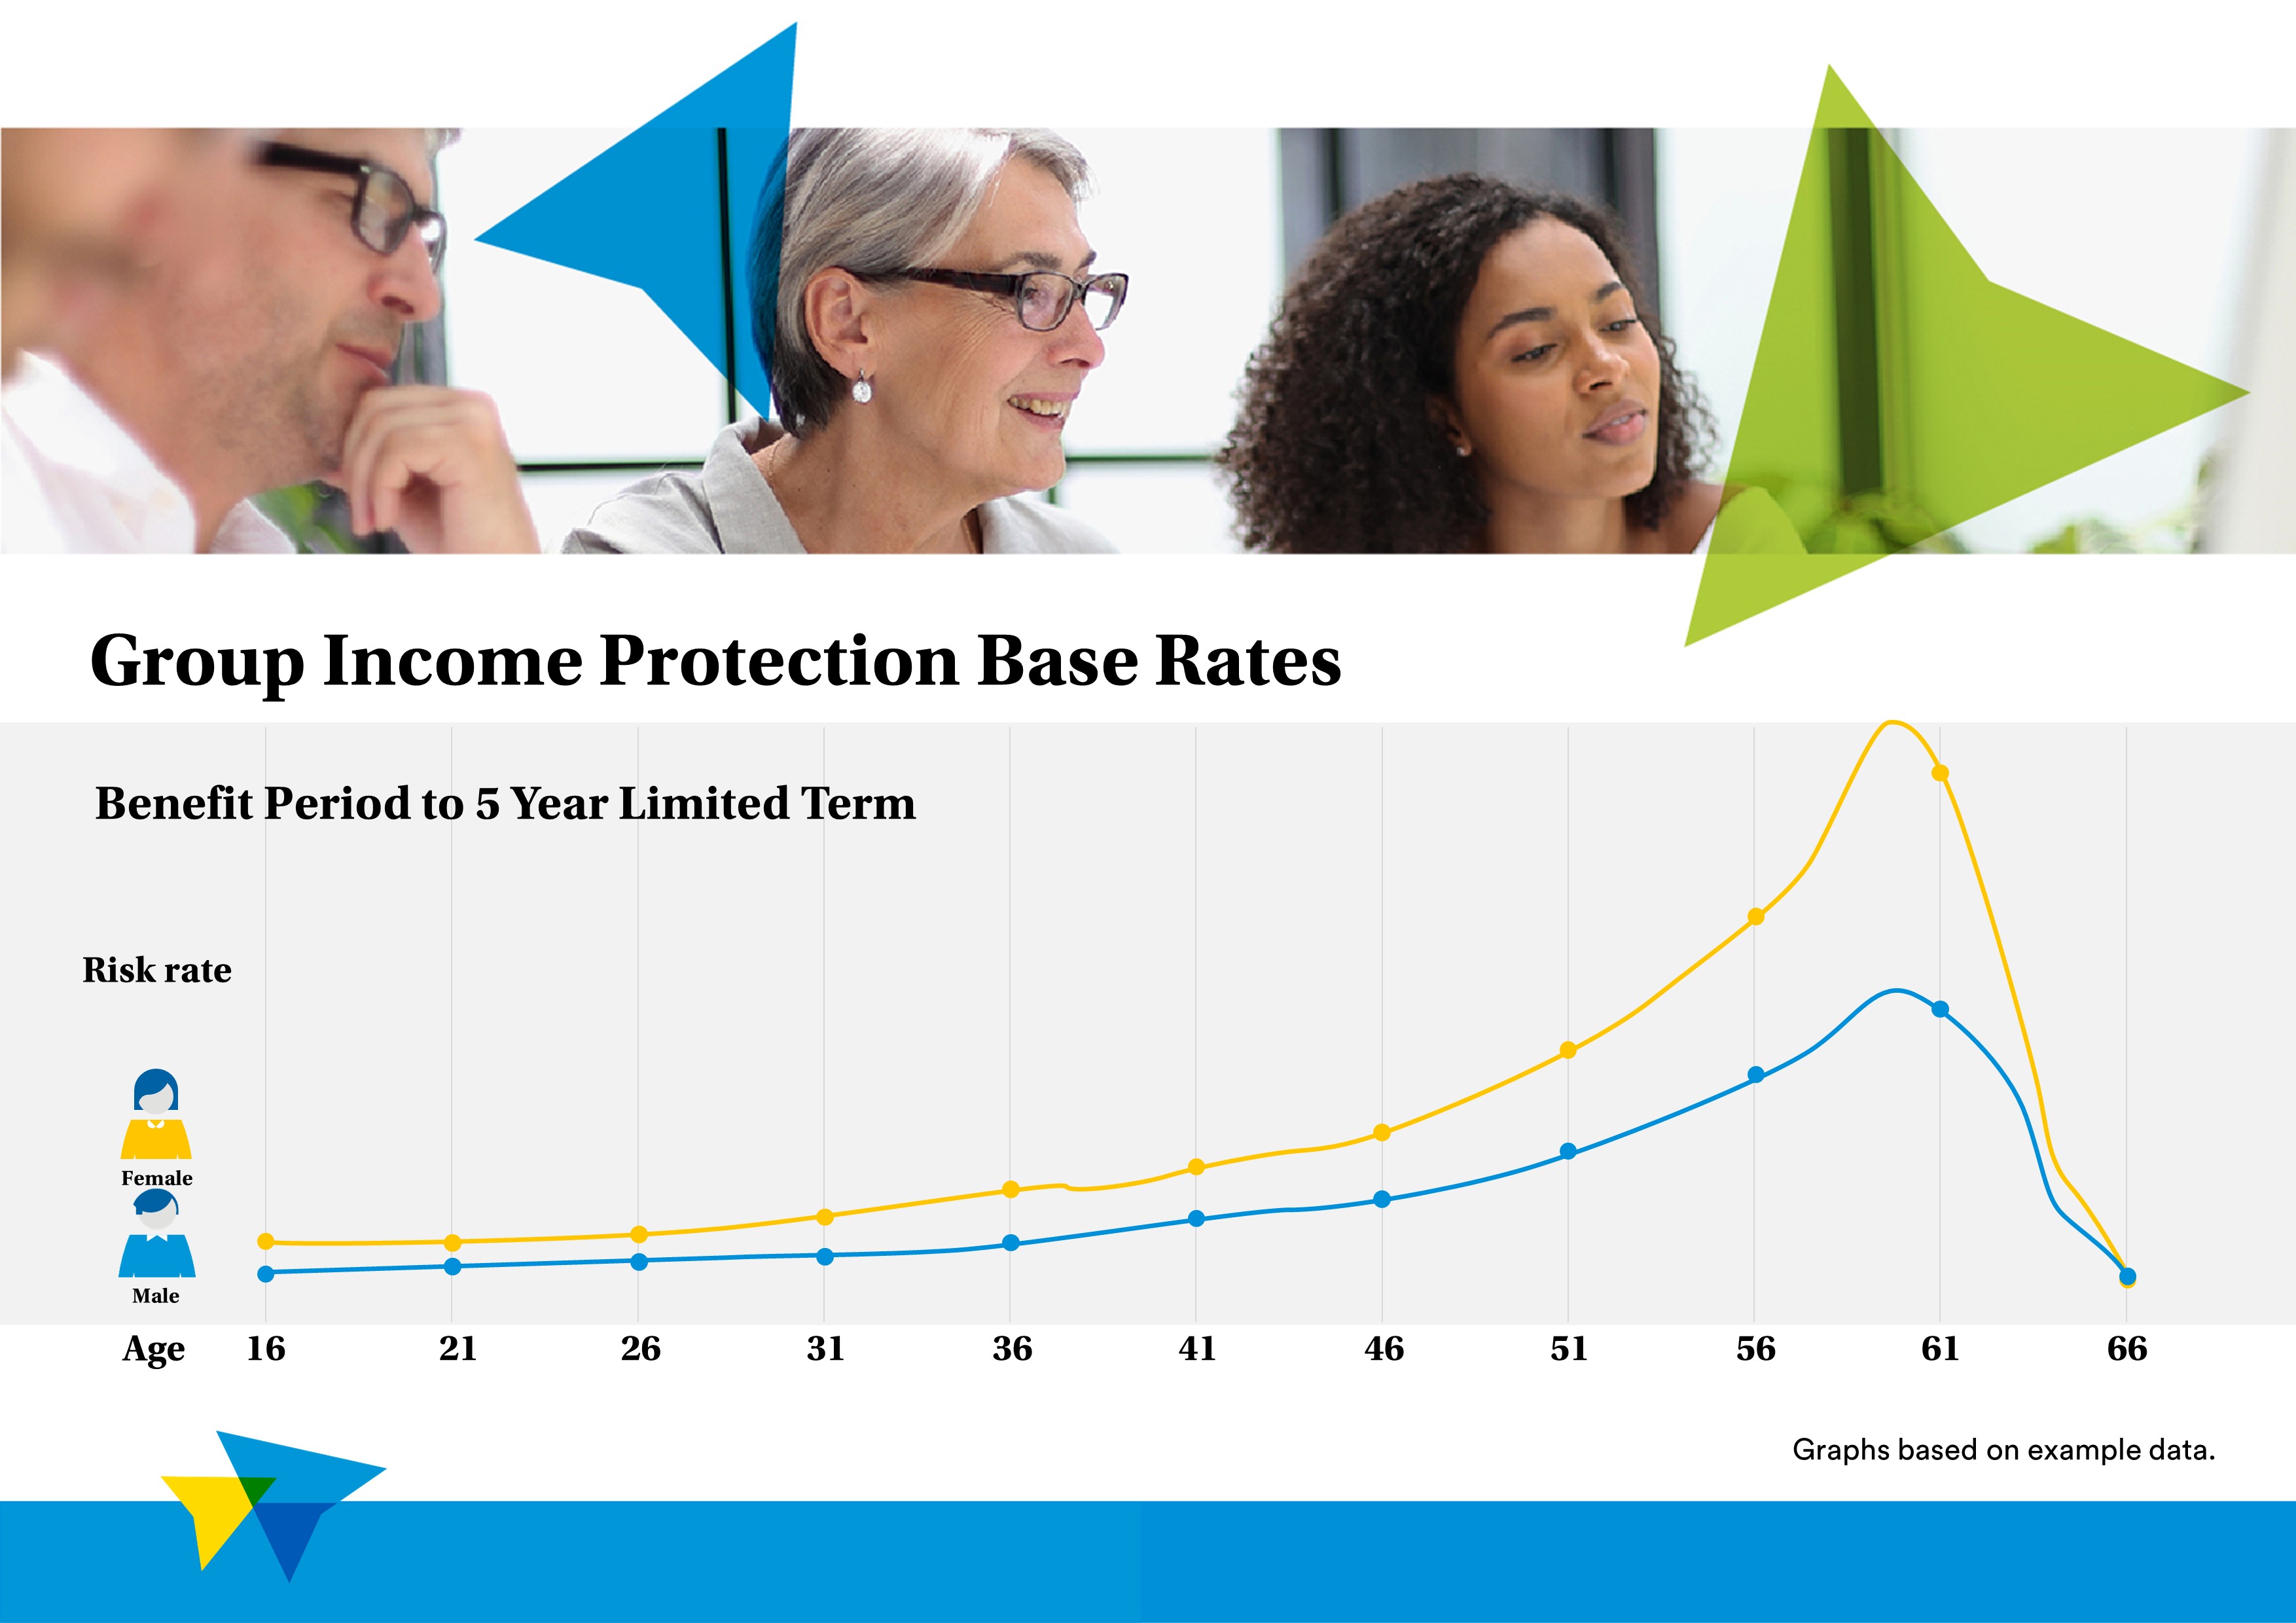 Group Income Protection base rates, with a benefit period to 5 year limited term. Featuring risks rates for both men and women, from ages 16 to 66. The graph is based on example data.